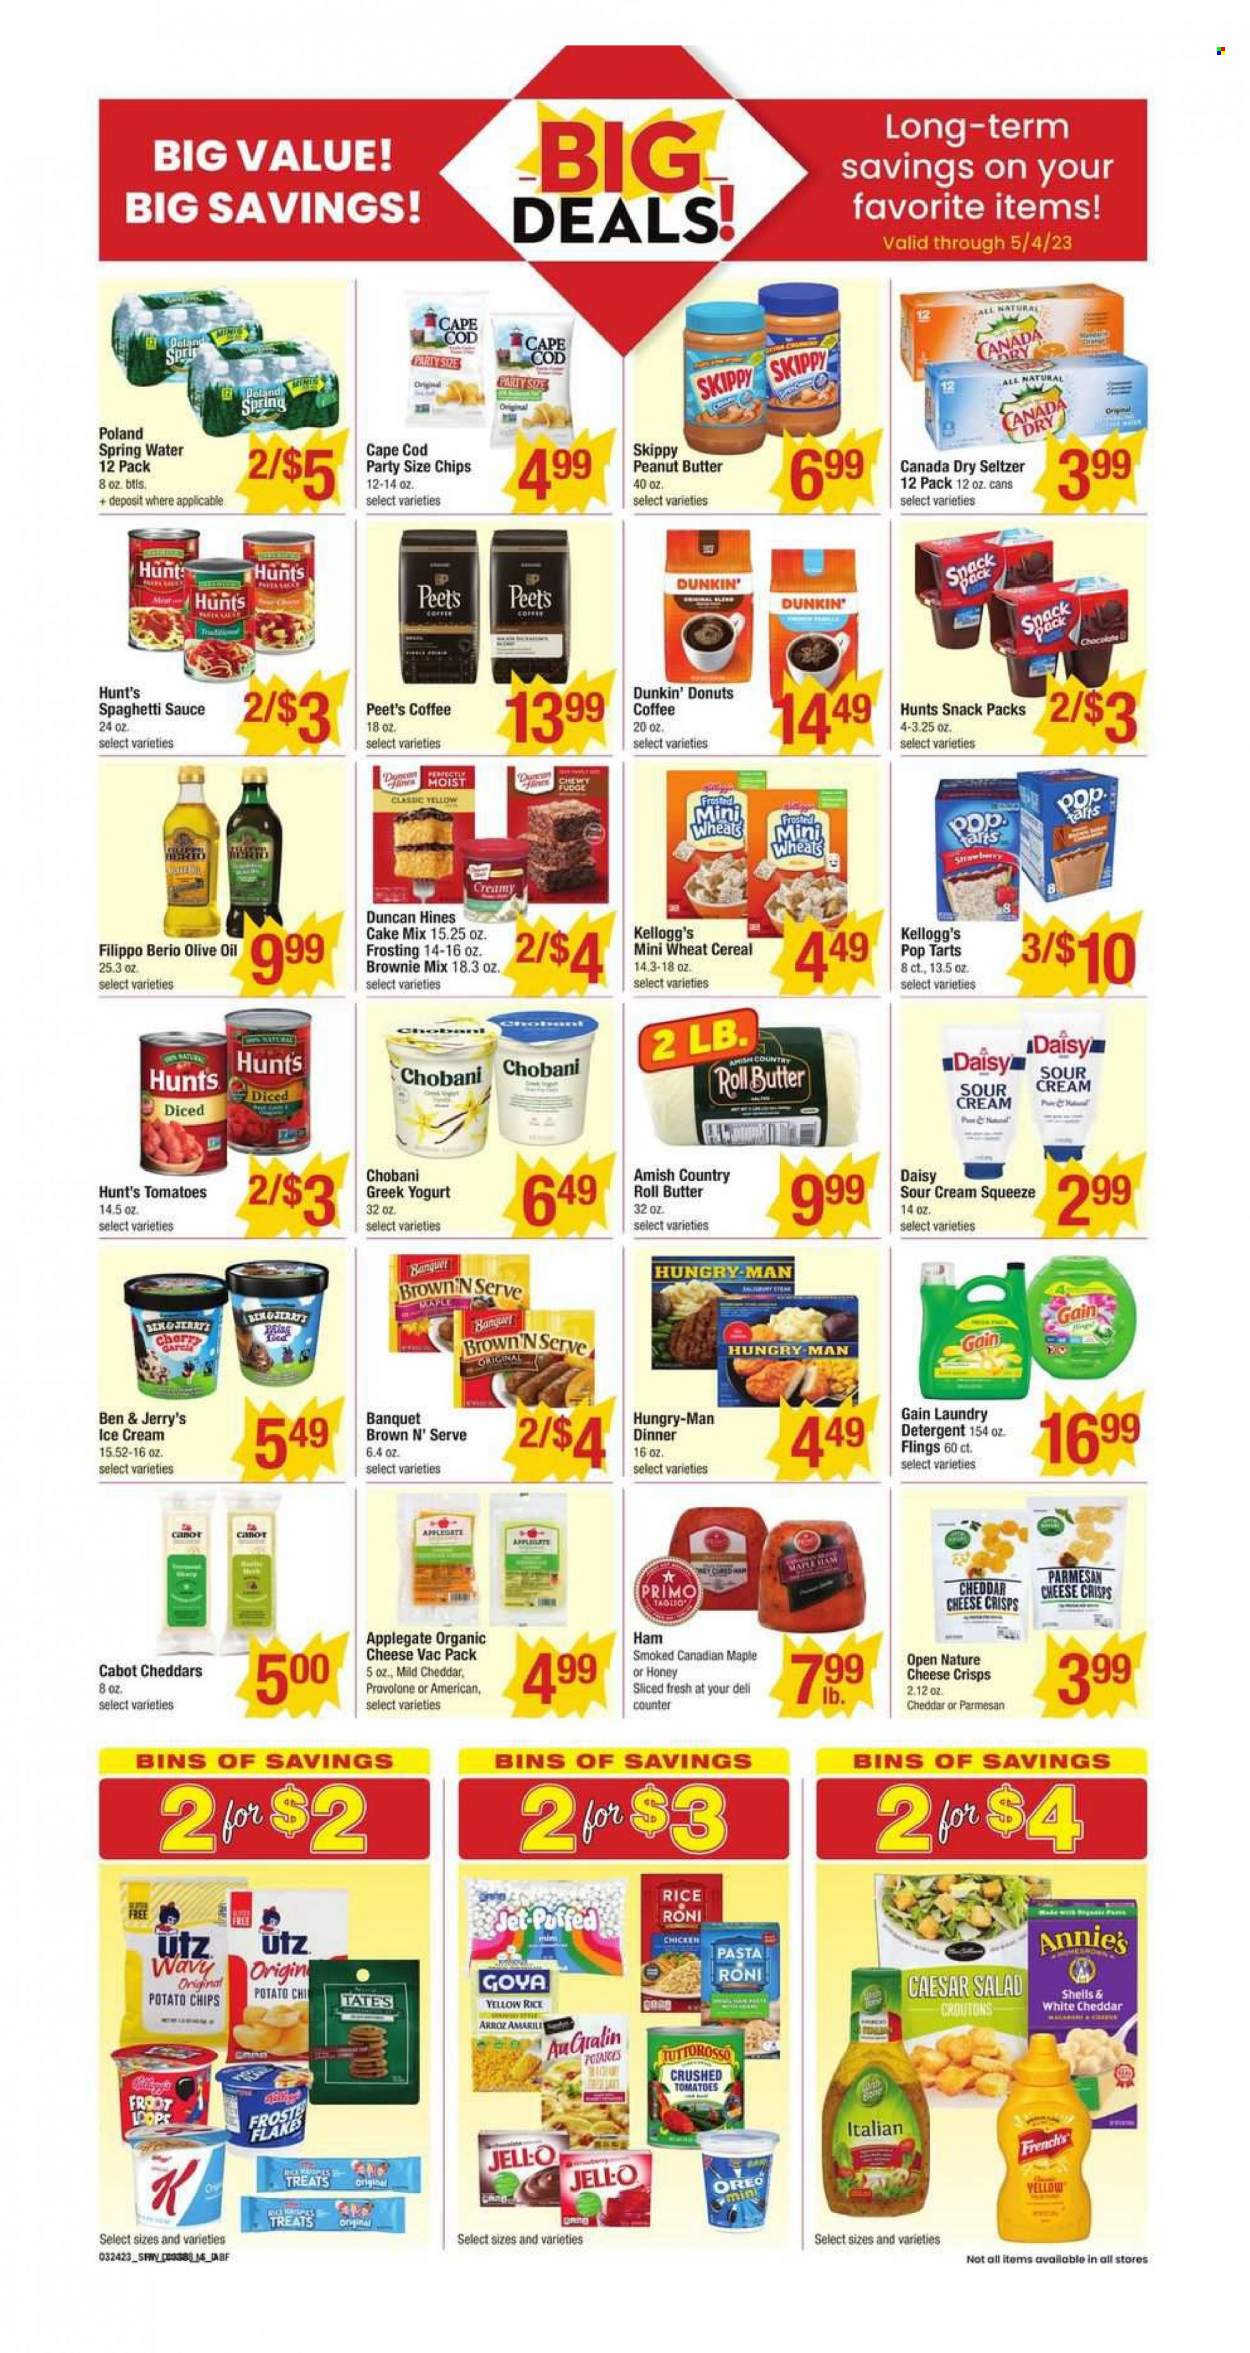 thumbnail - Star Market Flyer - 03/24/2023 - 03/30/2023 - Sales products - donut, Dunkin' Donuts, brownie mix, cake mix, tomatoes, salad, cod, spaghetti, pasta, sauce, Annie's, spaghetti sauce, ham, mild cheddar, parmesan, cheese, Provolone, greek yoghurt, Oreo, yoghurt, Chobani, sour cream, ice cream, Ben & Jerry's, fudge, Kellogg's, Pop-Tarts, potato chips, chips, croutons, frosting, Jell-O, crushed tomatoes, cereals, rice, olive oil, oil, peanut butter, Canada Dry, seltzer water, spring water, water, coffee, chicken. Page 5.